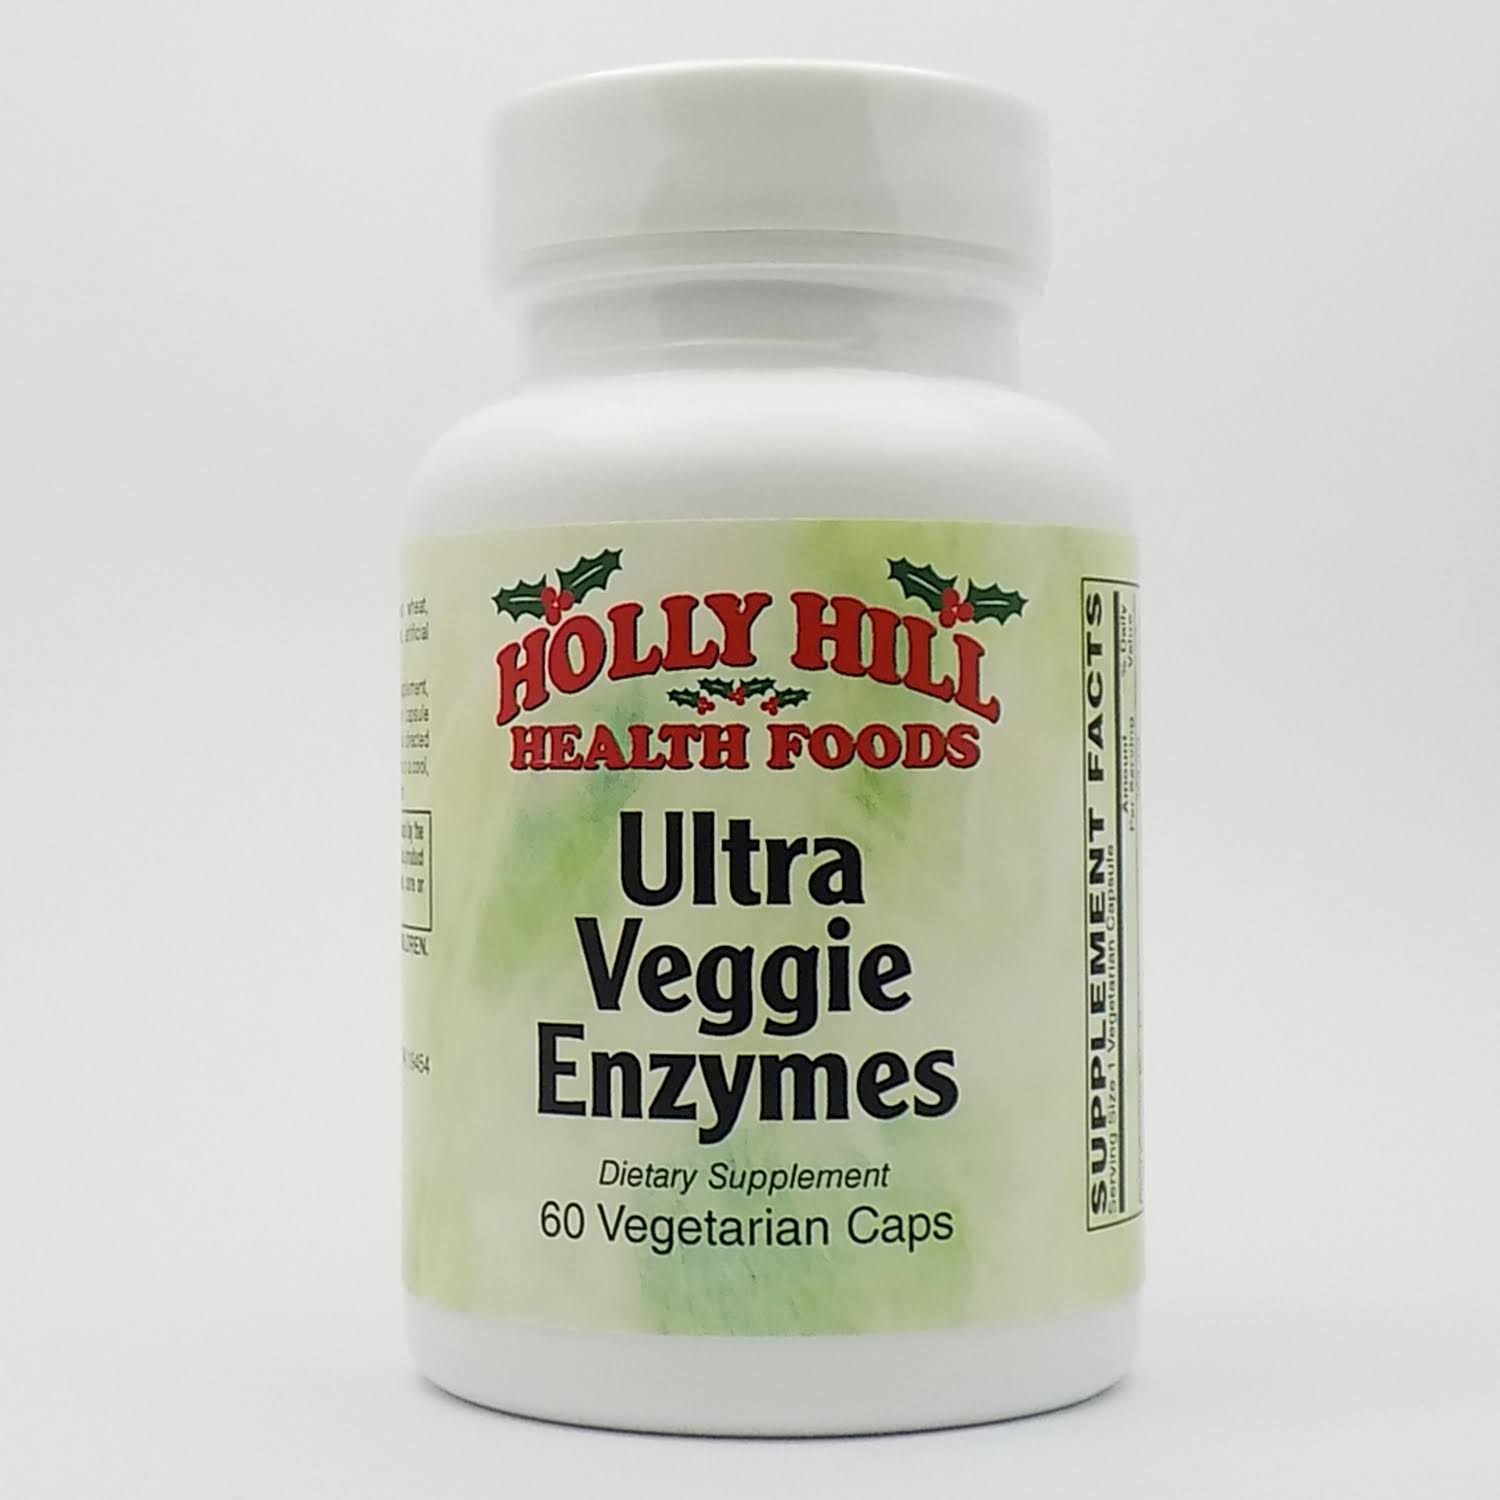 Holly Hill Health Foods, Ultra Veggie Enzymes, 60 Vegetarian Capsules